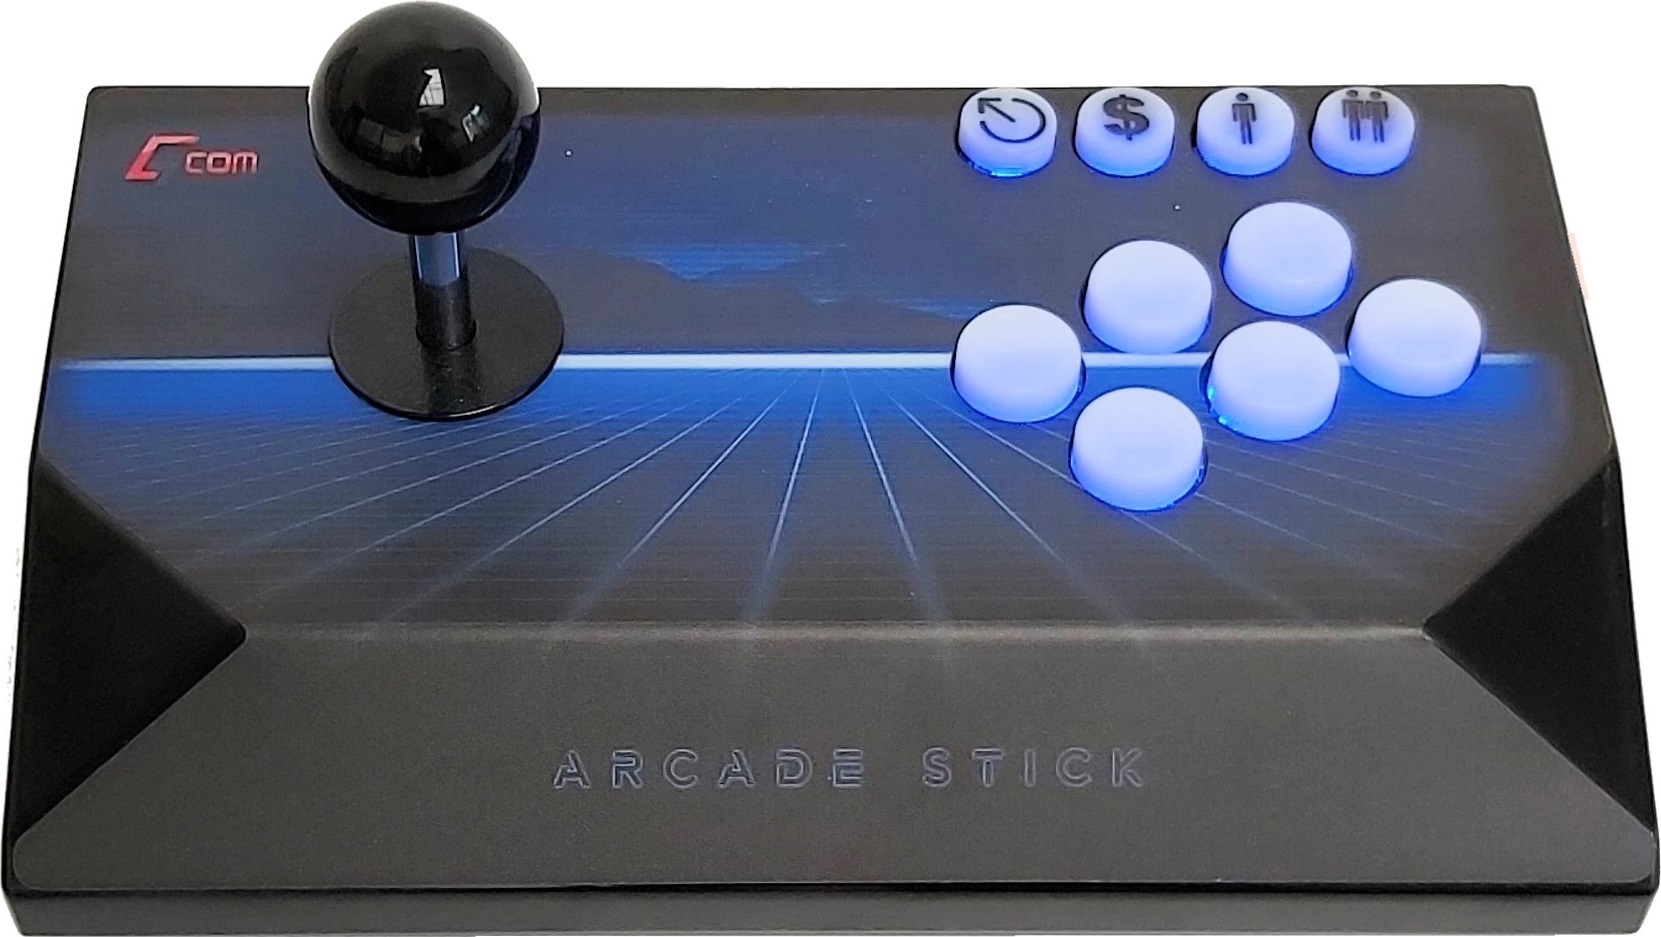 Read more about the article GCOM Arcade Stick Review